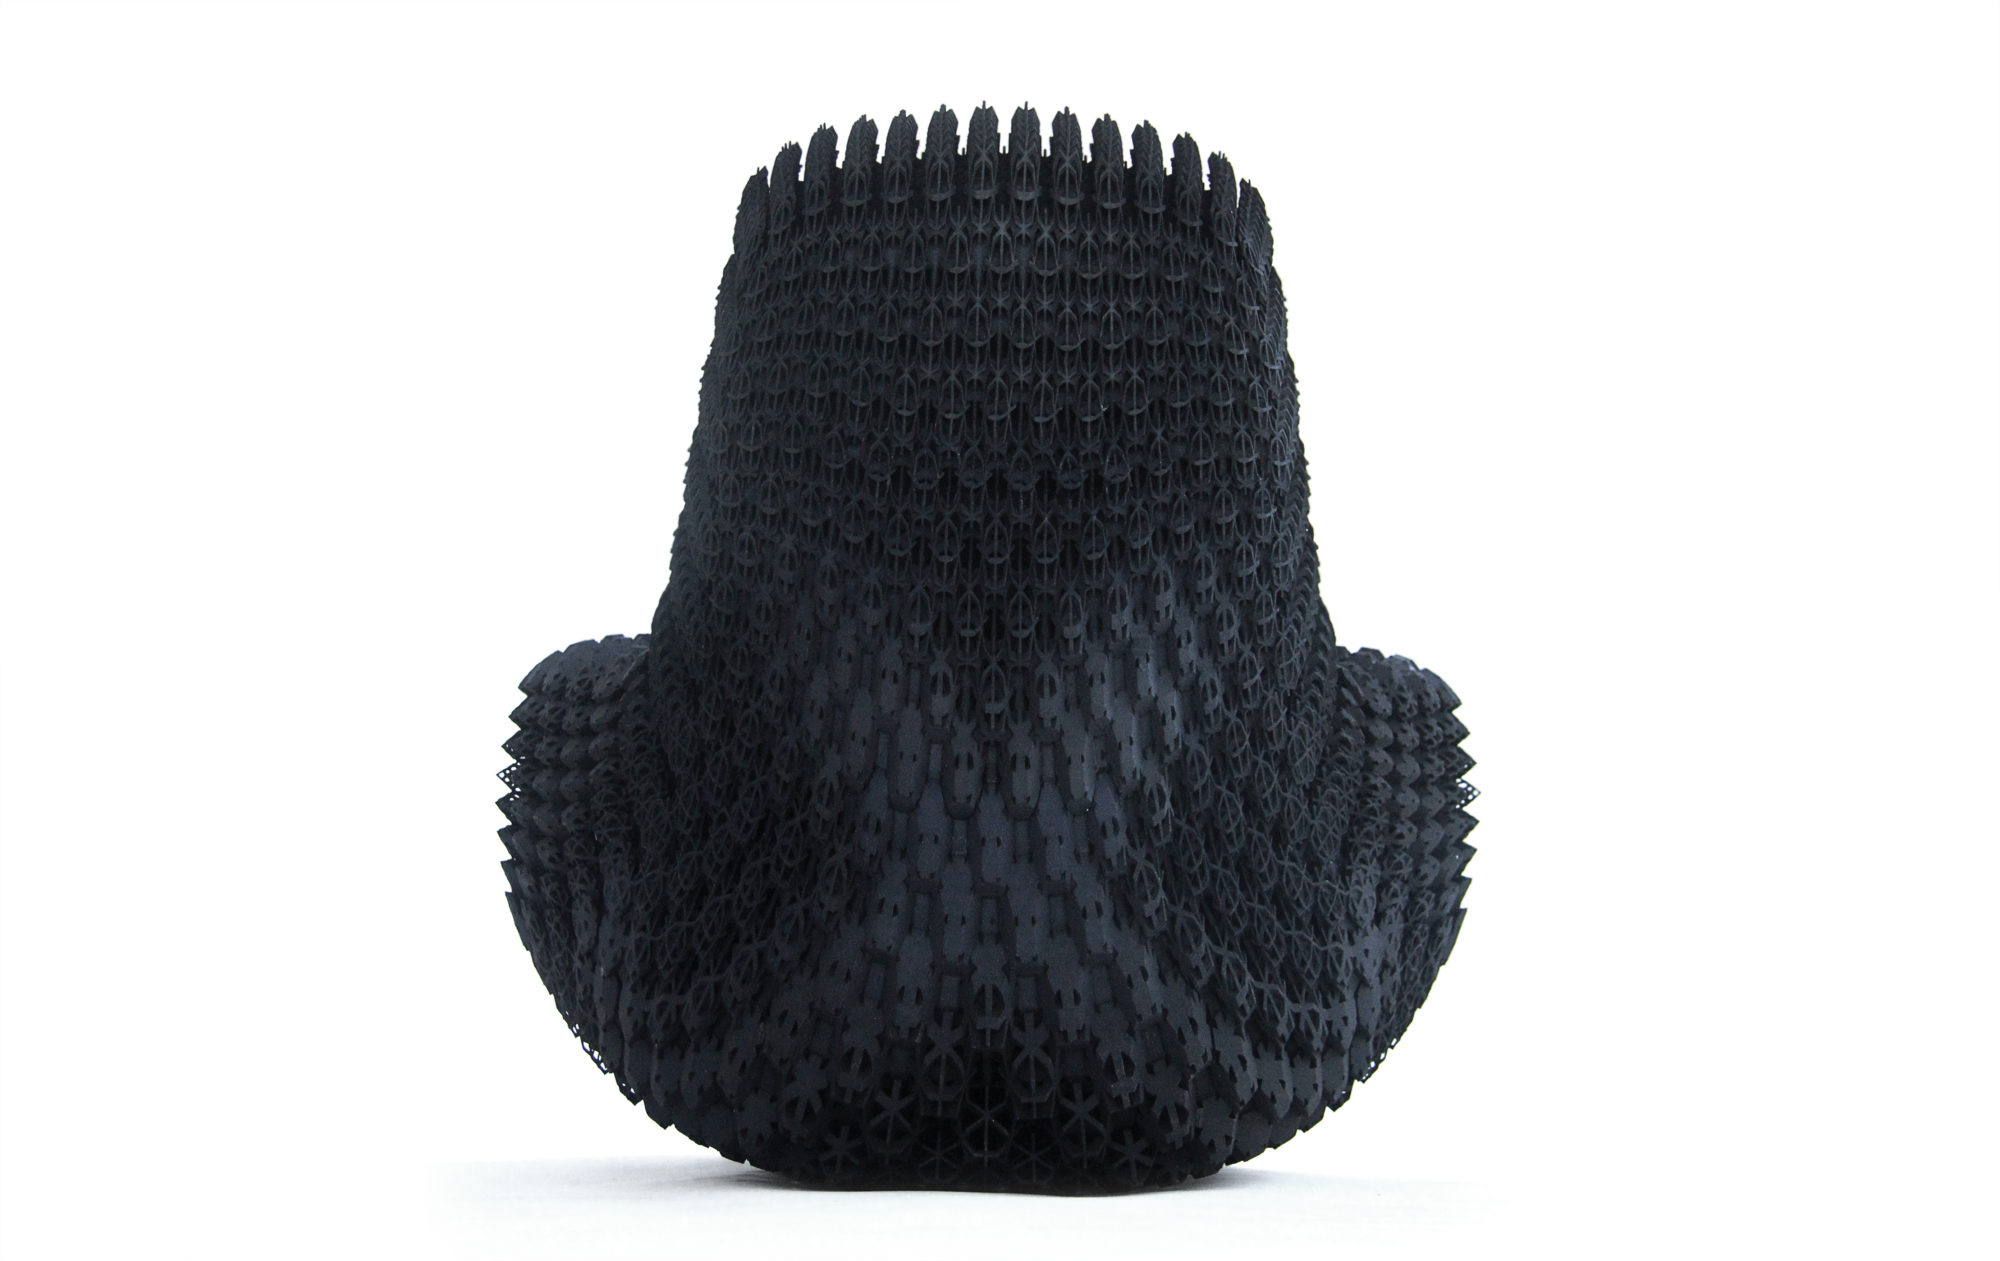 the back of a highly-textured, legless black chair